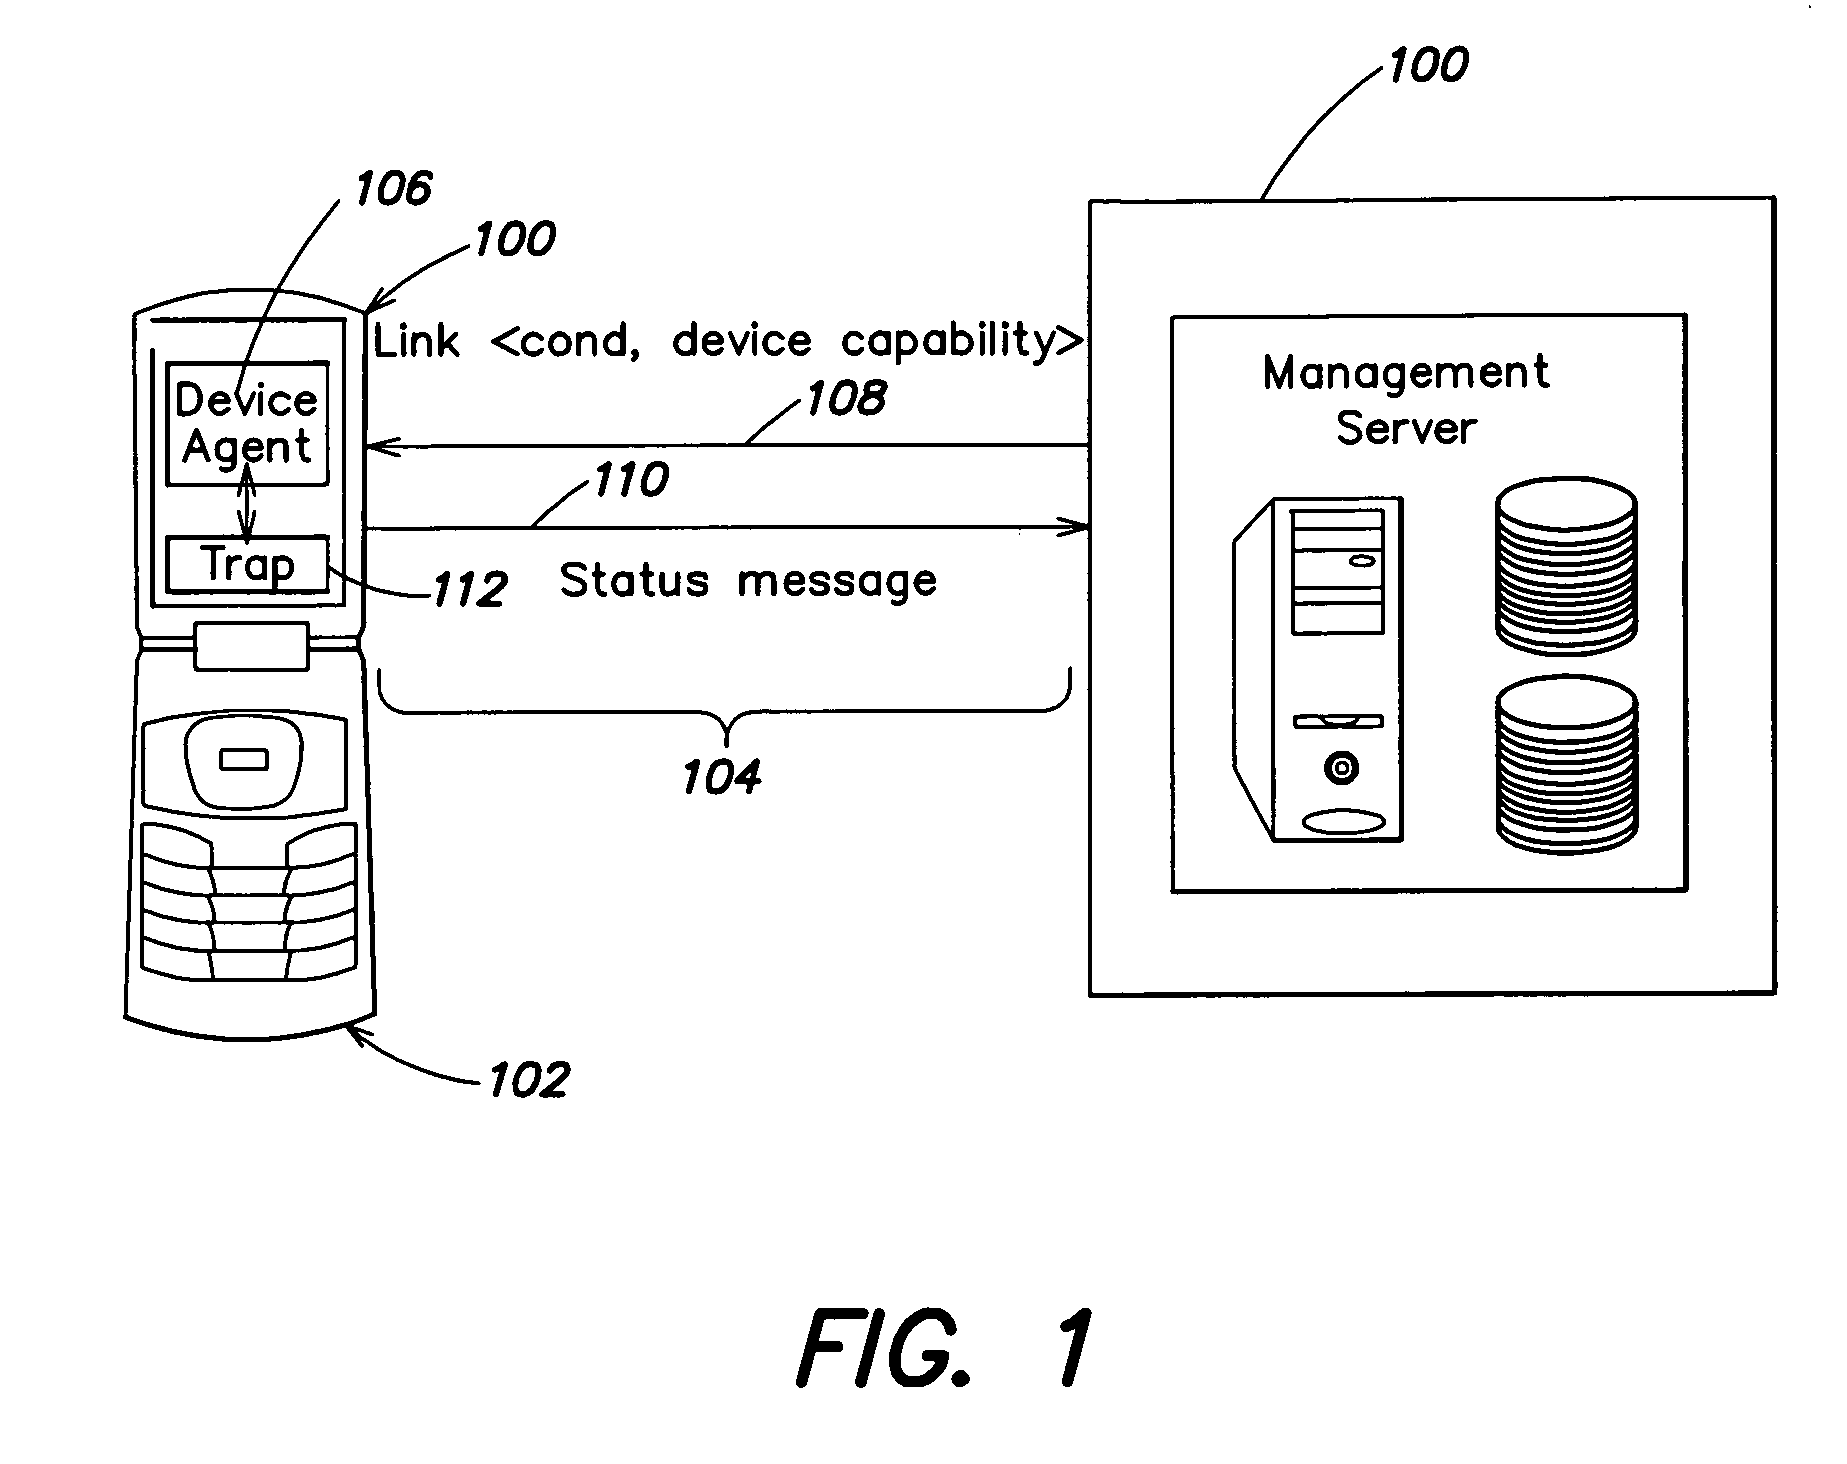 System and method for automatically altering device functionality